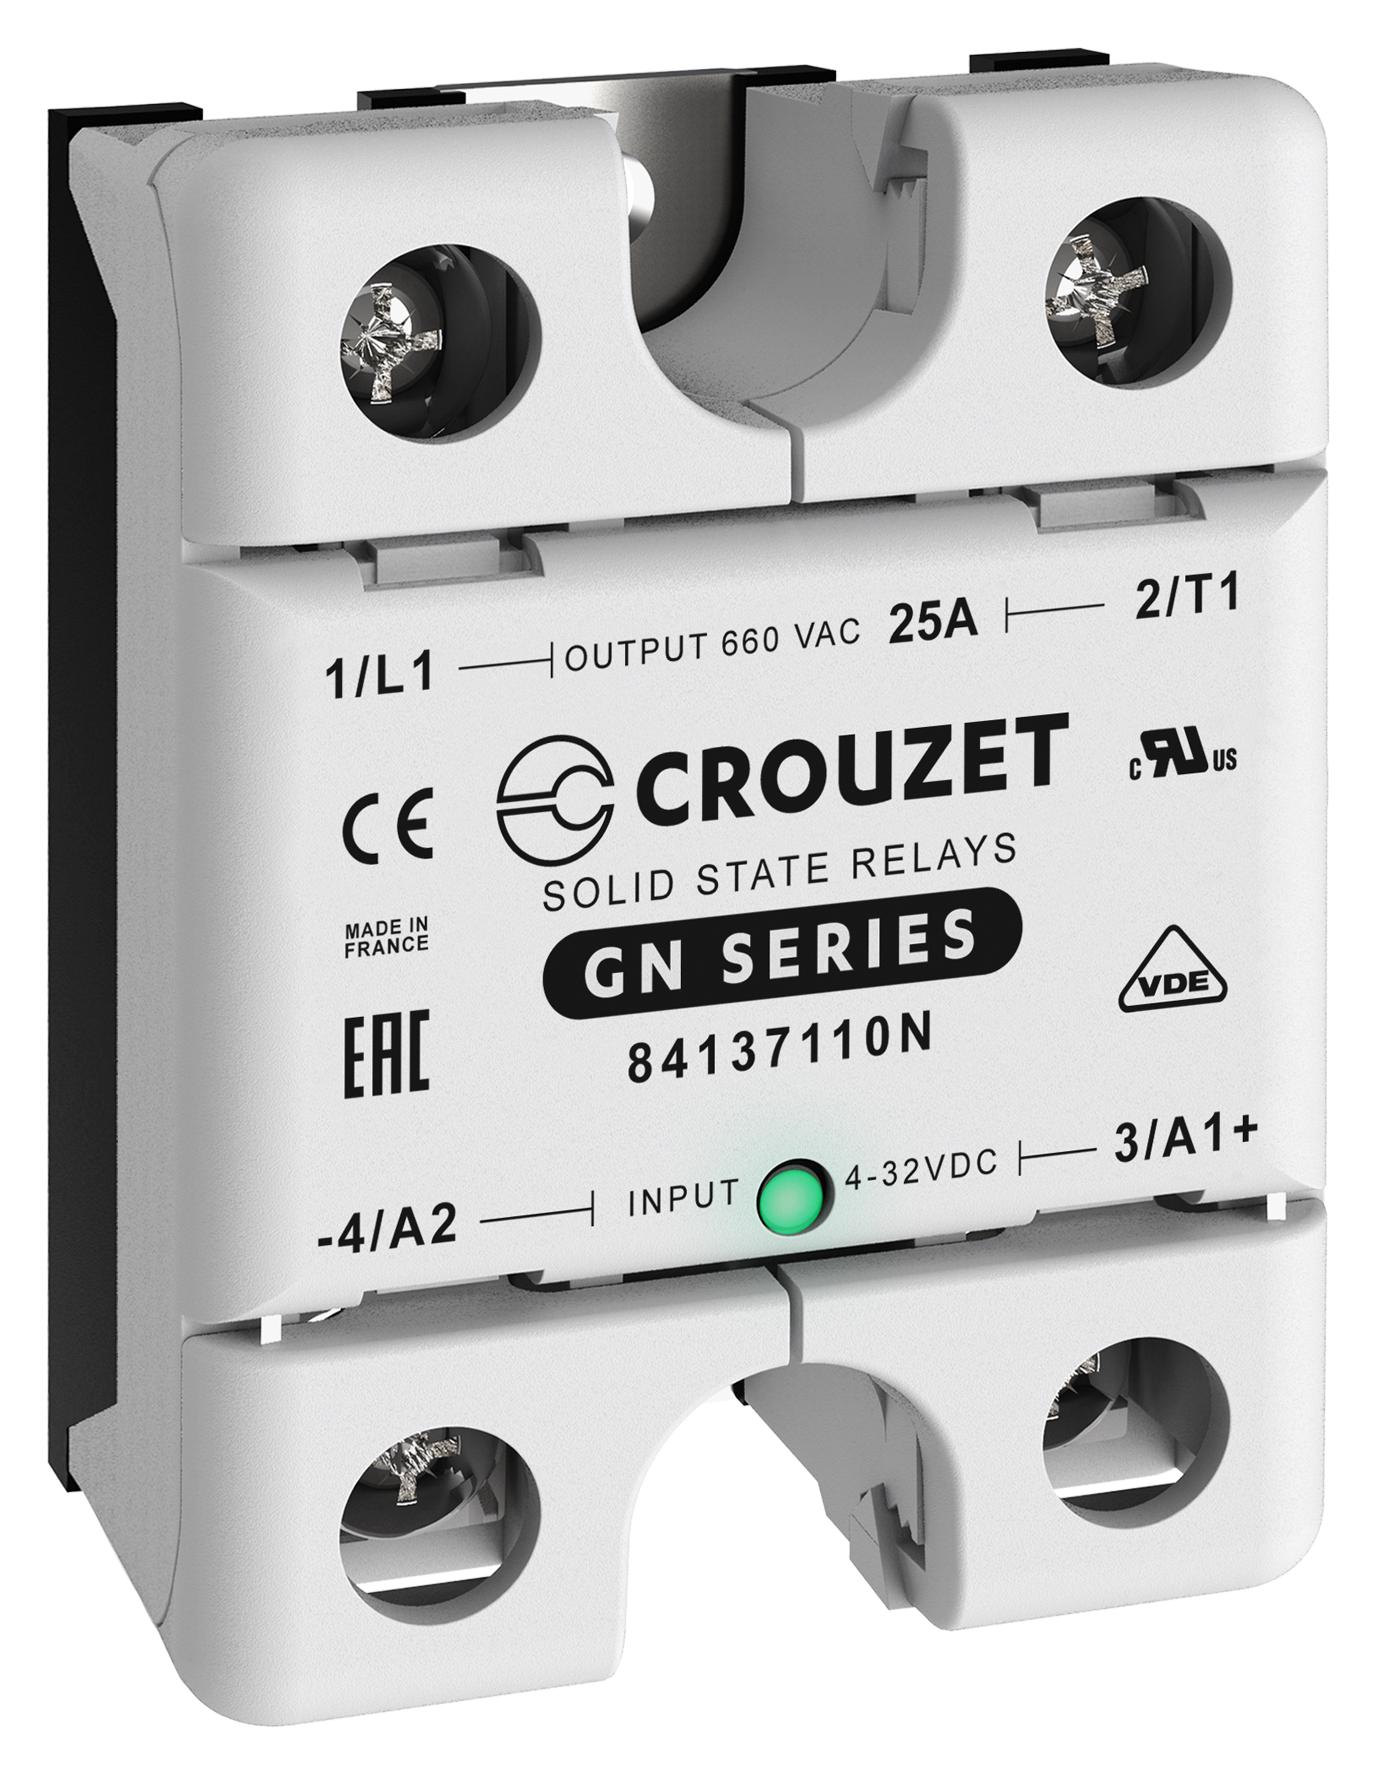 Crouzet 84137110N Solid State Relay, 25A, 48-660Vac, Panel